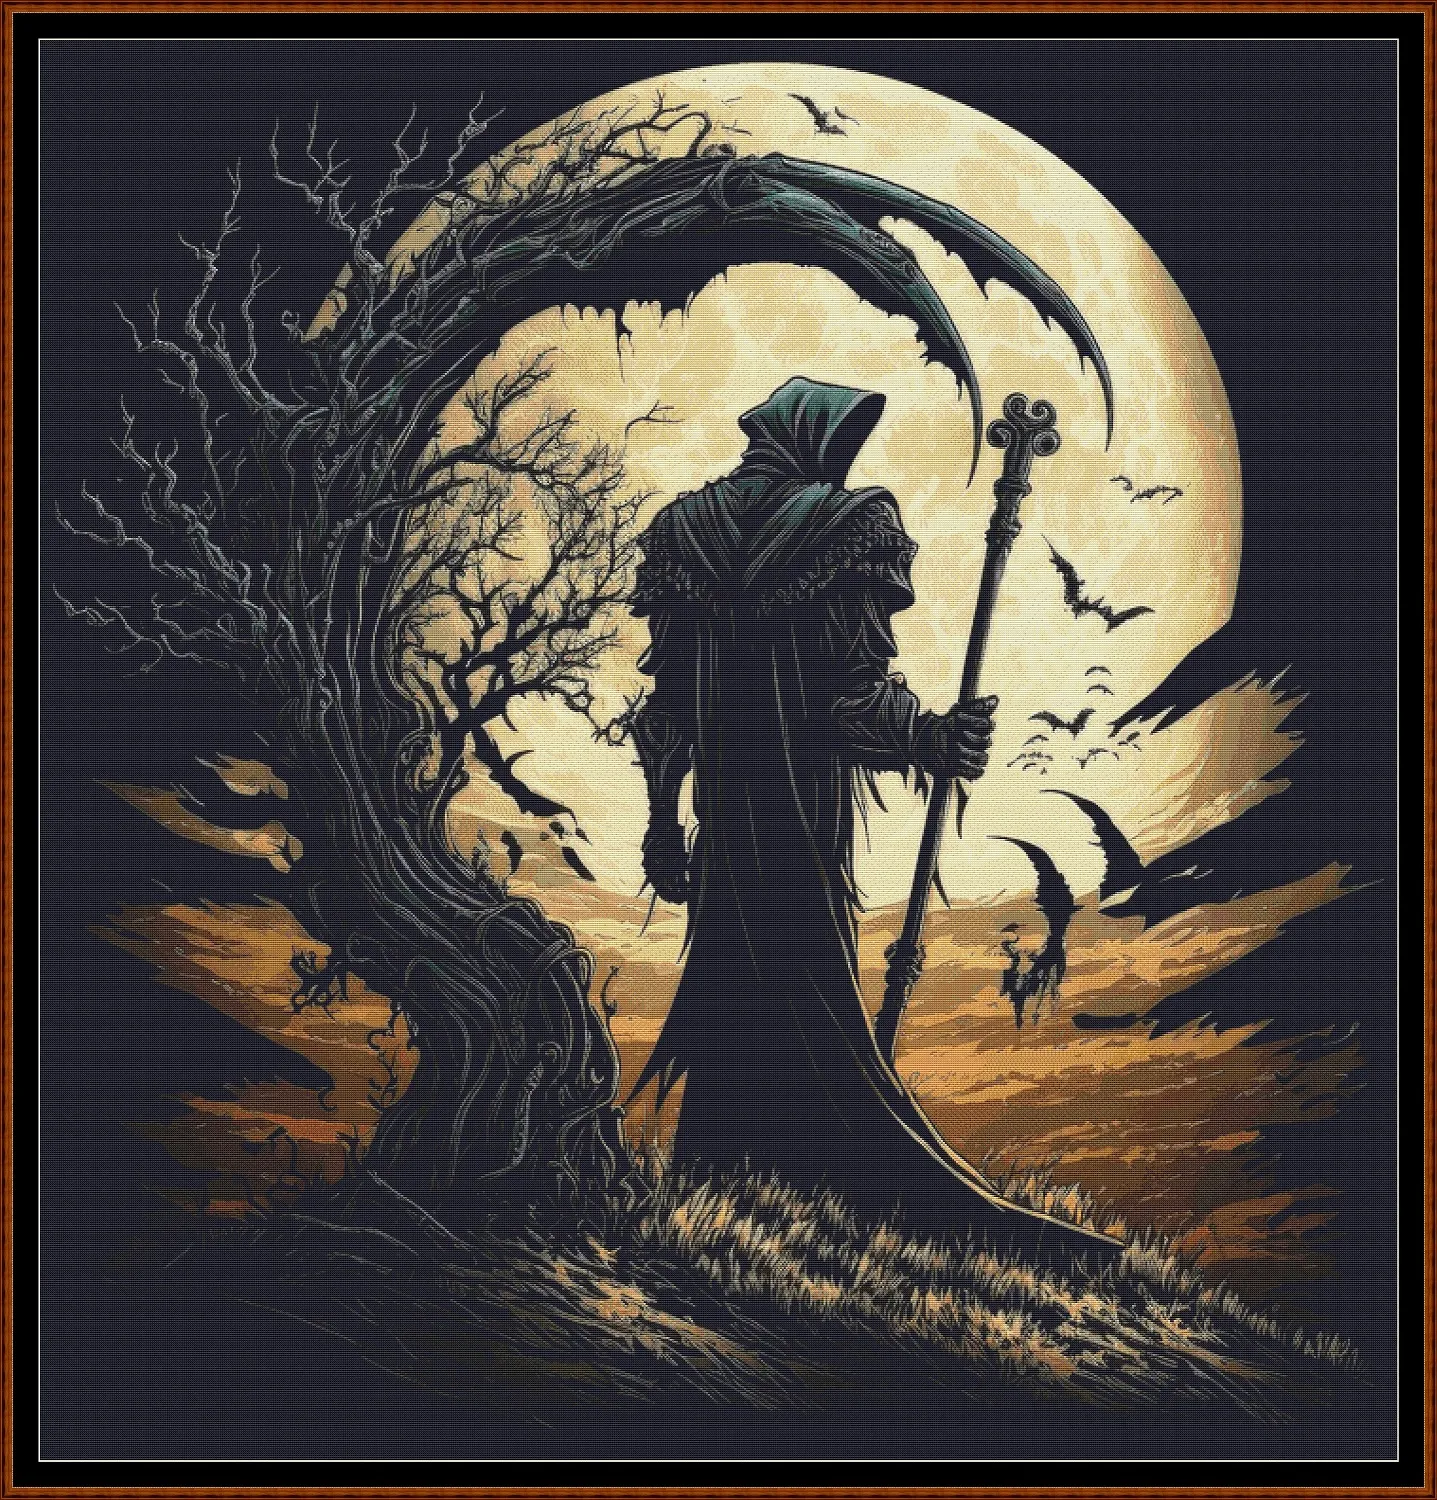 Watching The Full MoonGrim Reaper Death patterns are expertly created from art by Gismi under Public Domain CC0 license